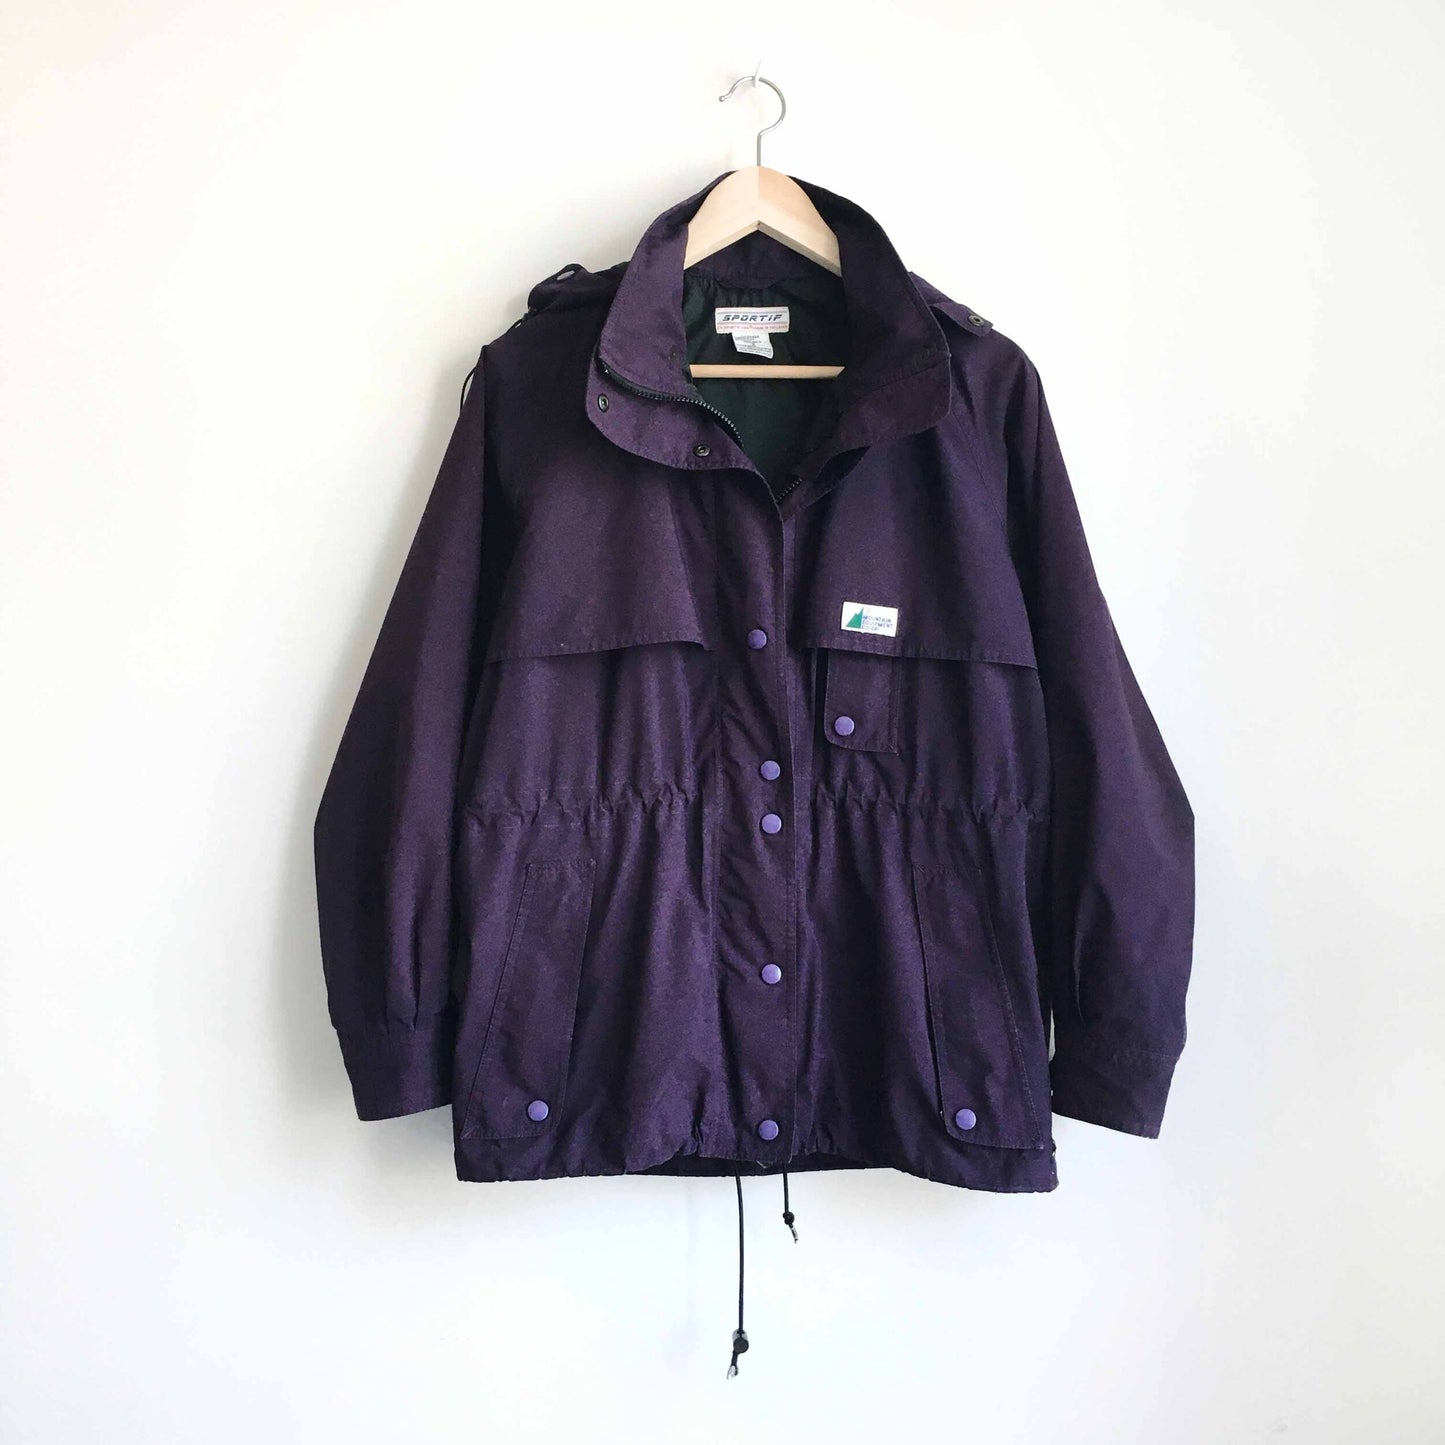 Vintage MEC Drawstring All-weather Jacket - size Small